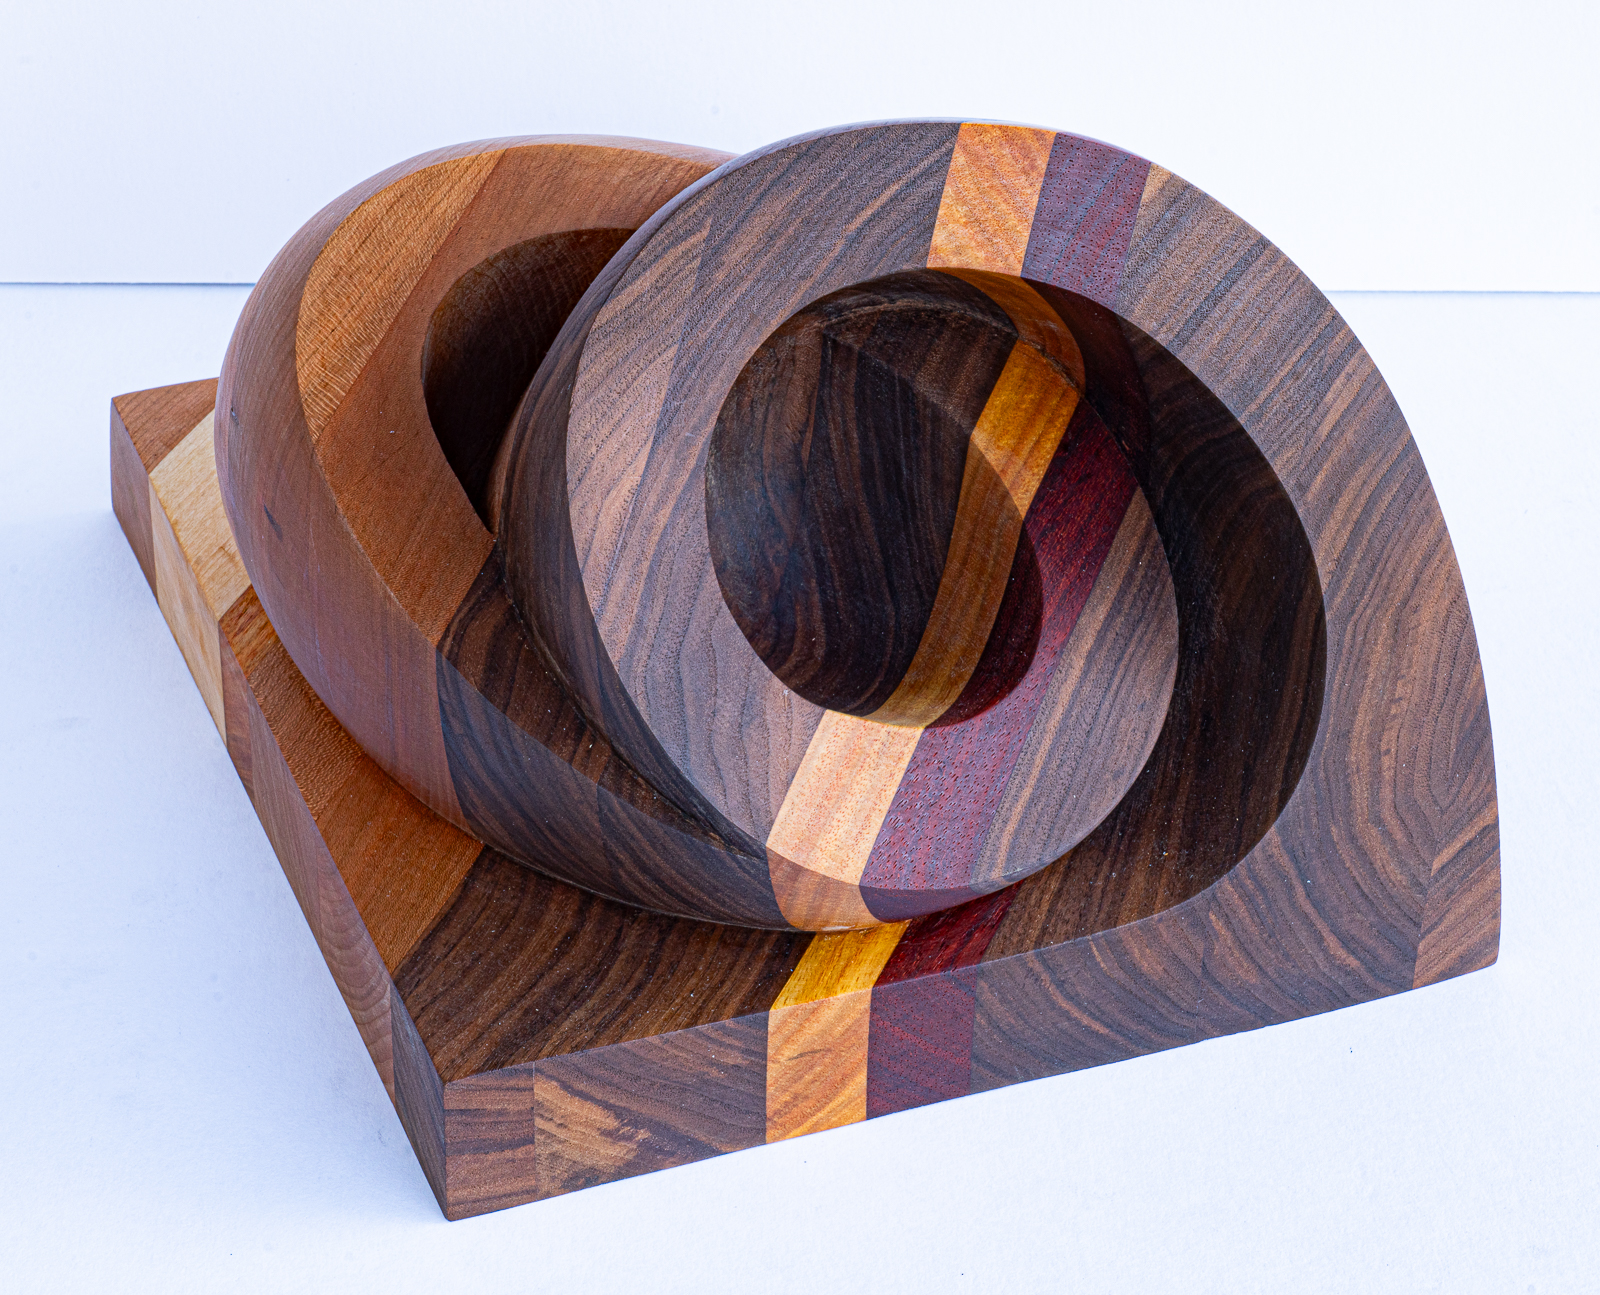 Ross  Stockwell, Coupled Forms, 2023. Wood (walnut, padouk, canary, cherry, bass), 11” x 13” x 9.5”.